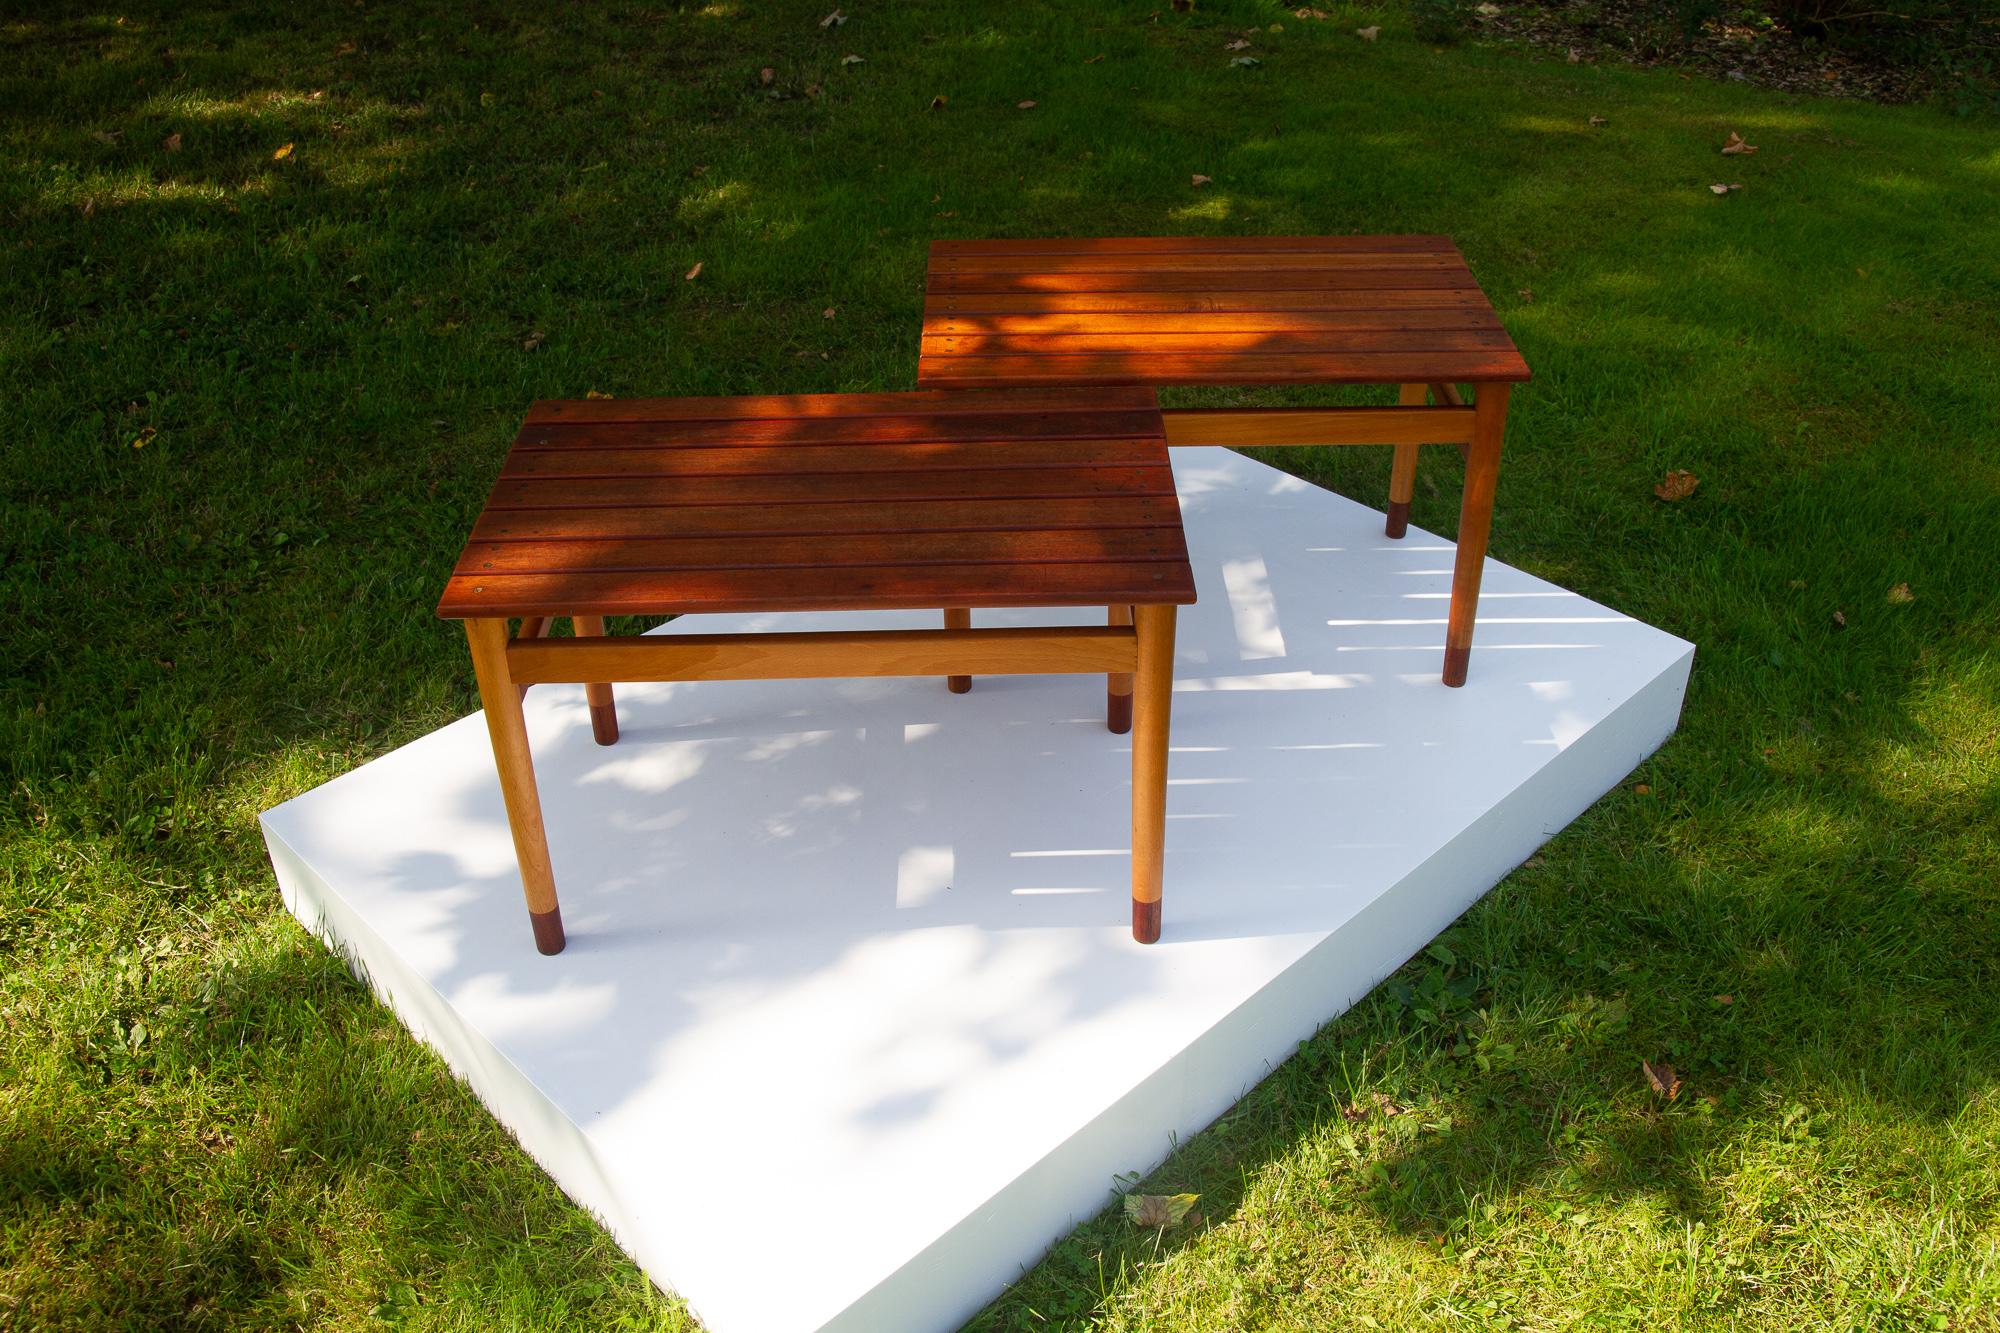 Vintage Danish teak and beech side tables 1950s, Set of 2
Beautiful pair of tables with top in solid teak and frame in solid beech with teak feet.
Made by unknown Danish carpenter in the 1950s. Very much in the style of Børge Mogensen. Suitable